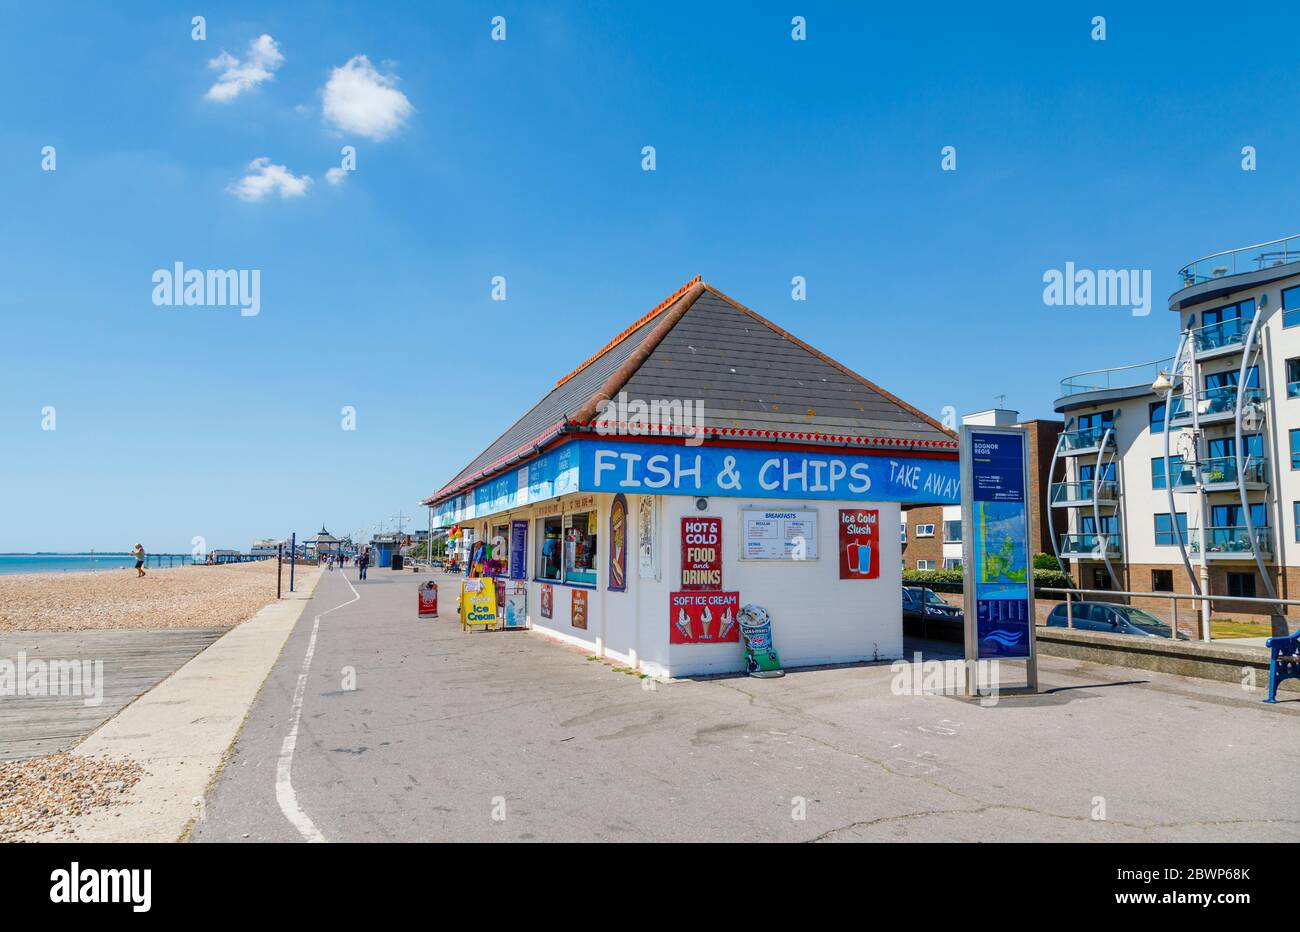 Esplanade beach kiosk shops and snack bars on the seafront in Bognor Regis, a seaside town in West Sussex, south coast England on a sunny day Stock Photo